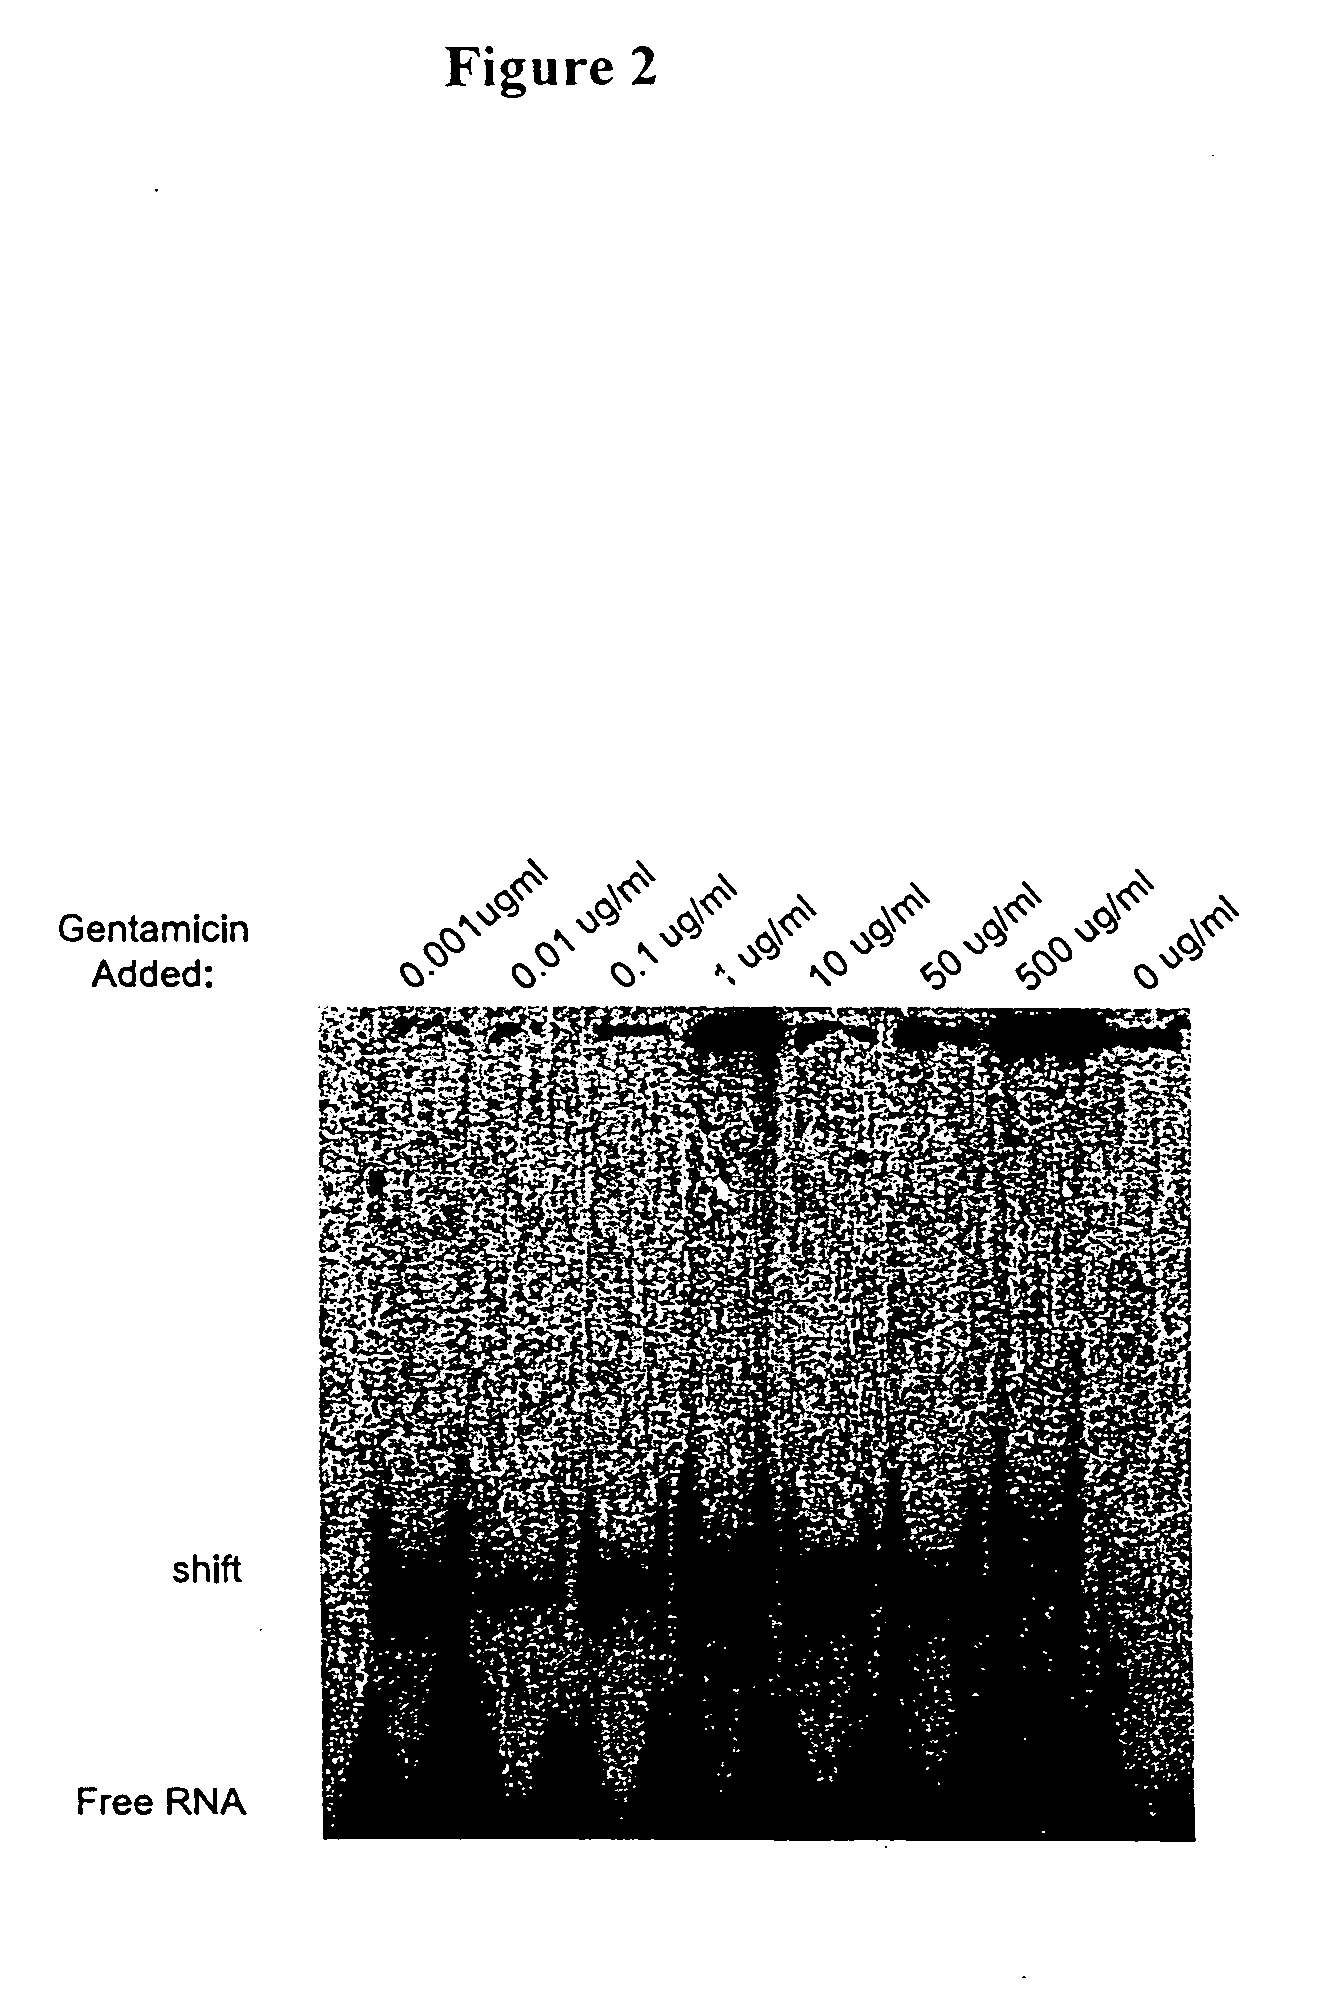 Methods for identifying small molecules that bind specific rna structural motifs